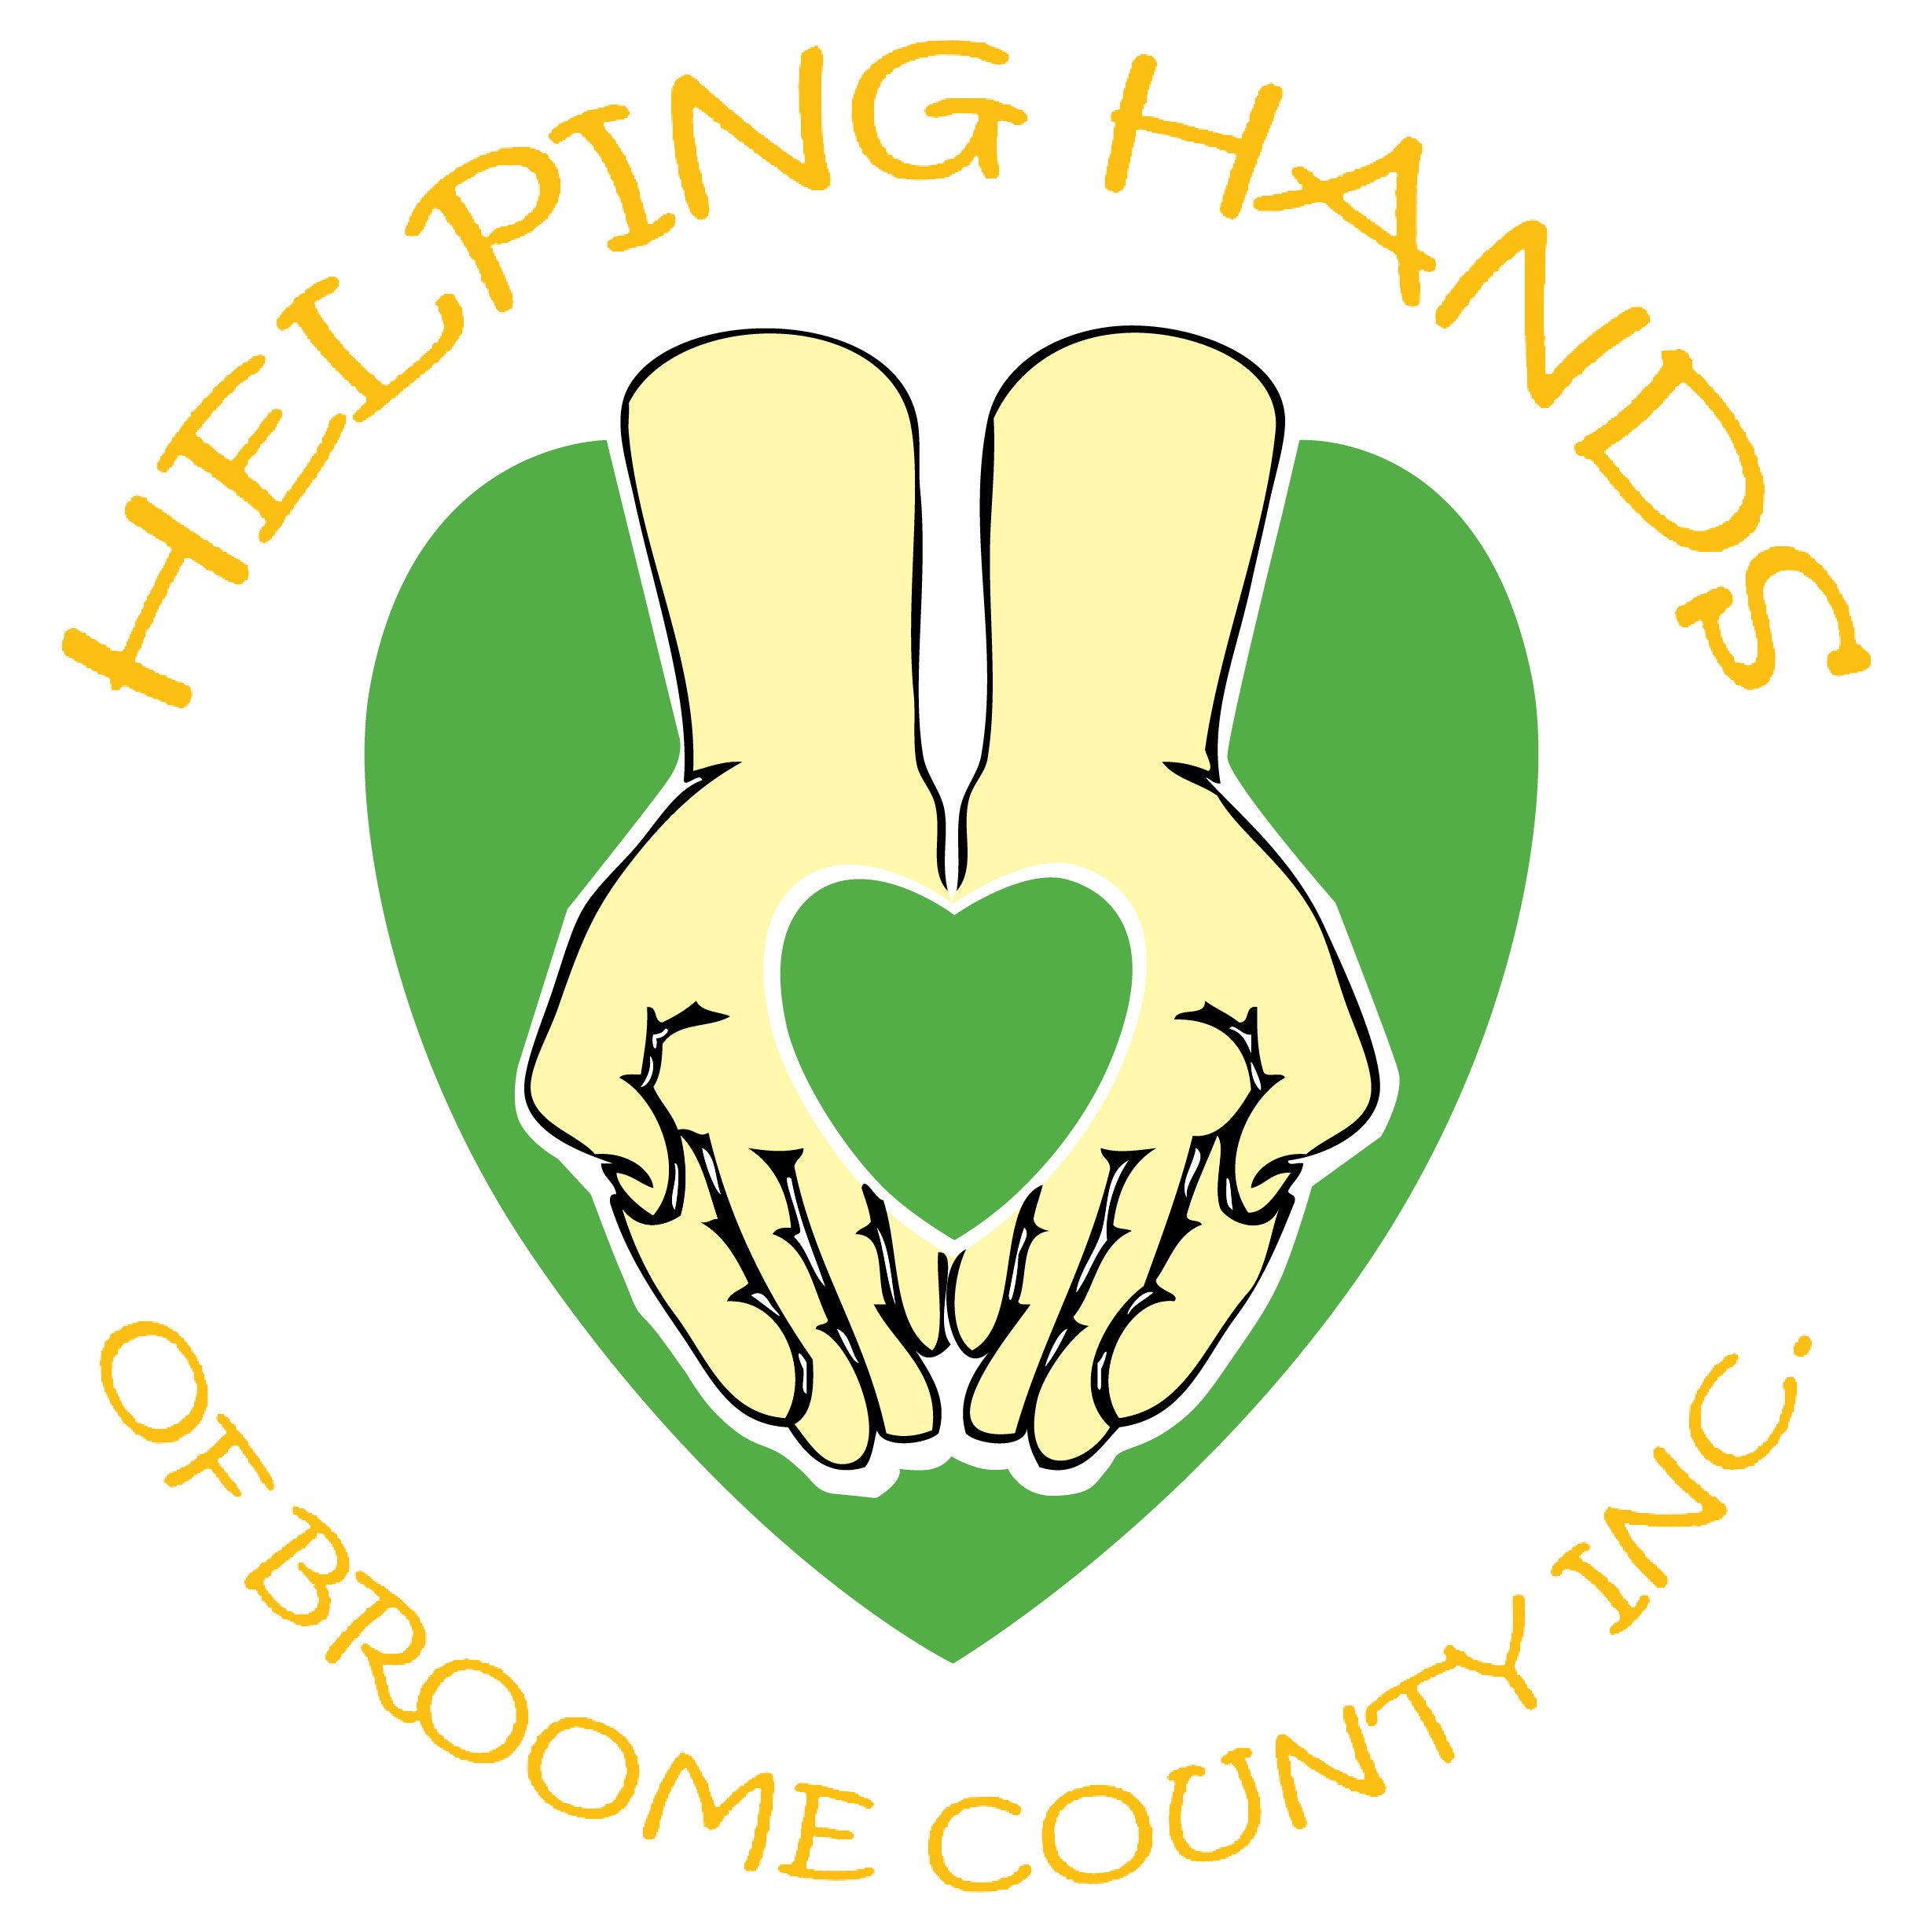 Image Library - helping hands logo remade_hr